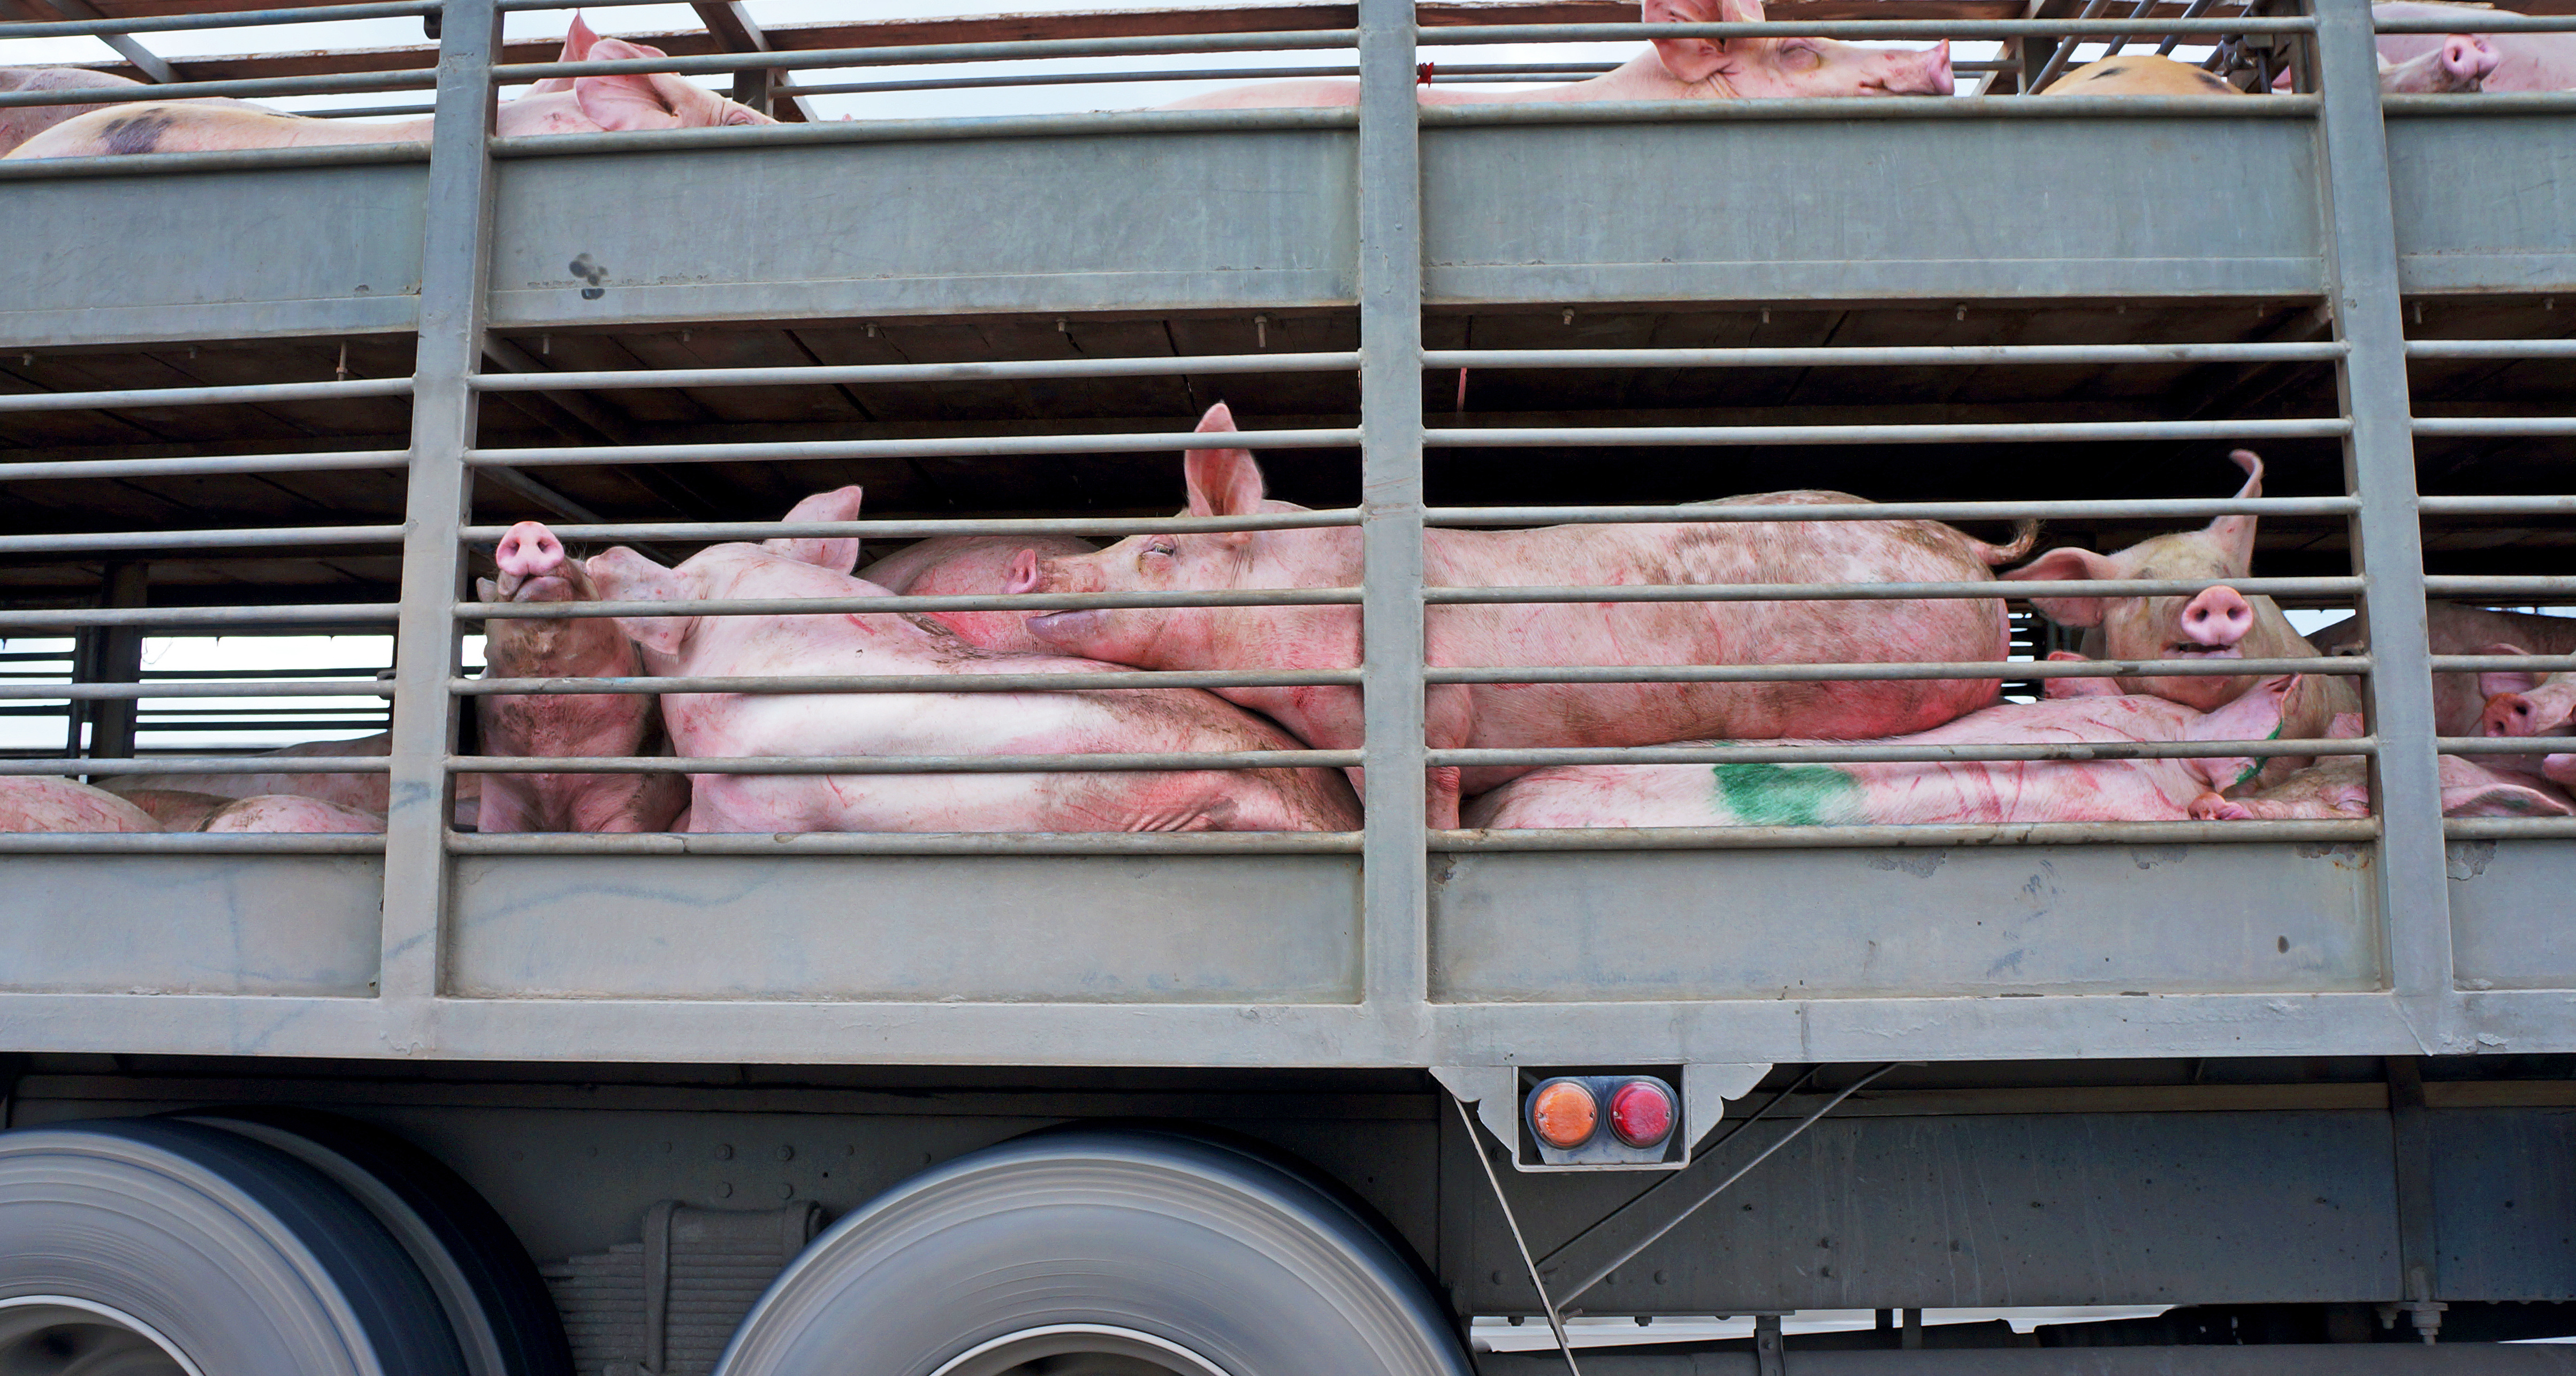 The type of vehicle and loading procedure can influence stress levels in market pigs